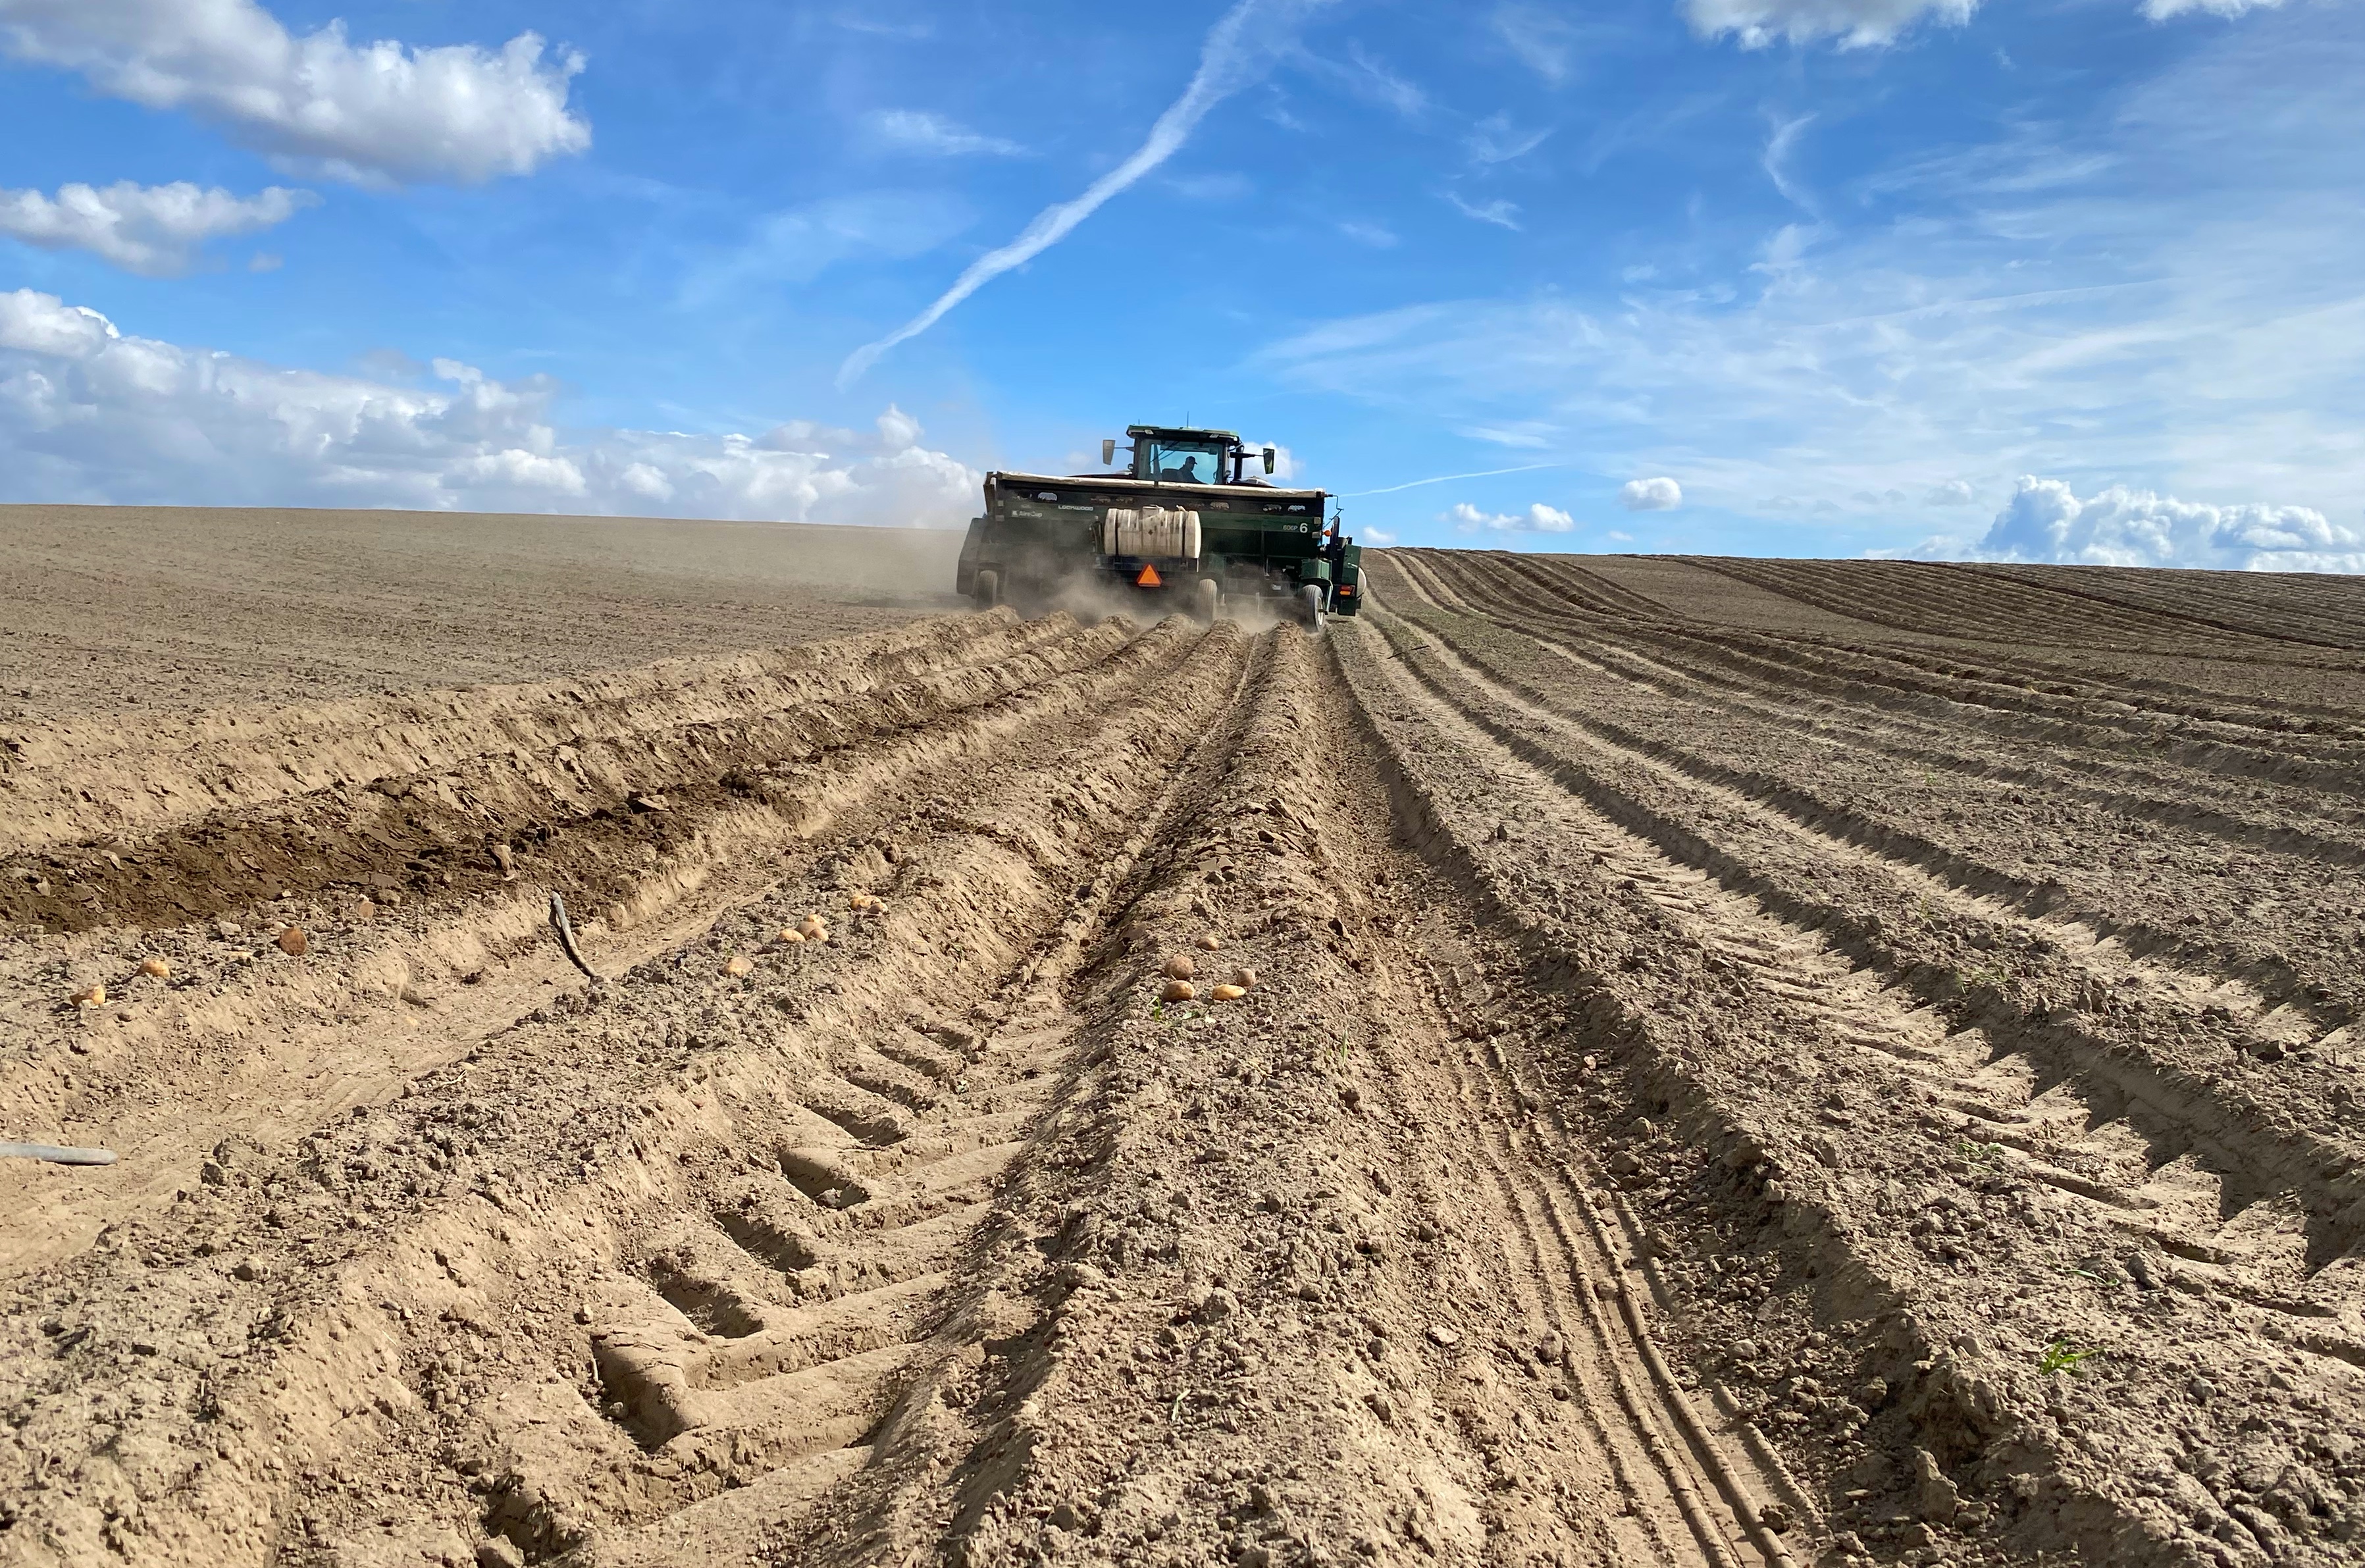 The Tiegs family has so much potato ground to get planted – more than 30,000 acres – they have start early in the season, often one of the first in the Columbia Basin to finish planting by early summer.